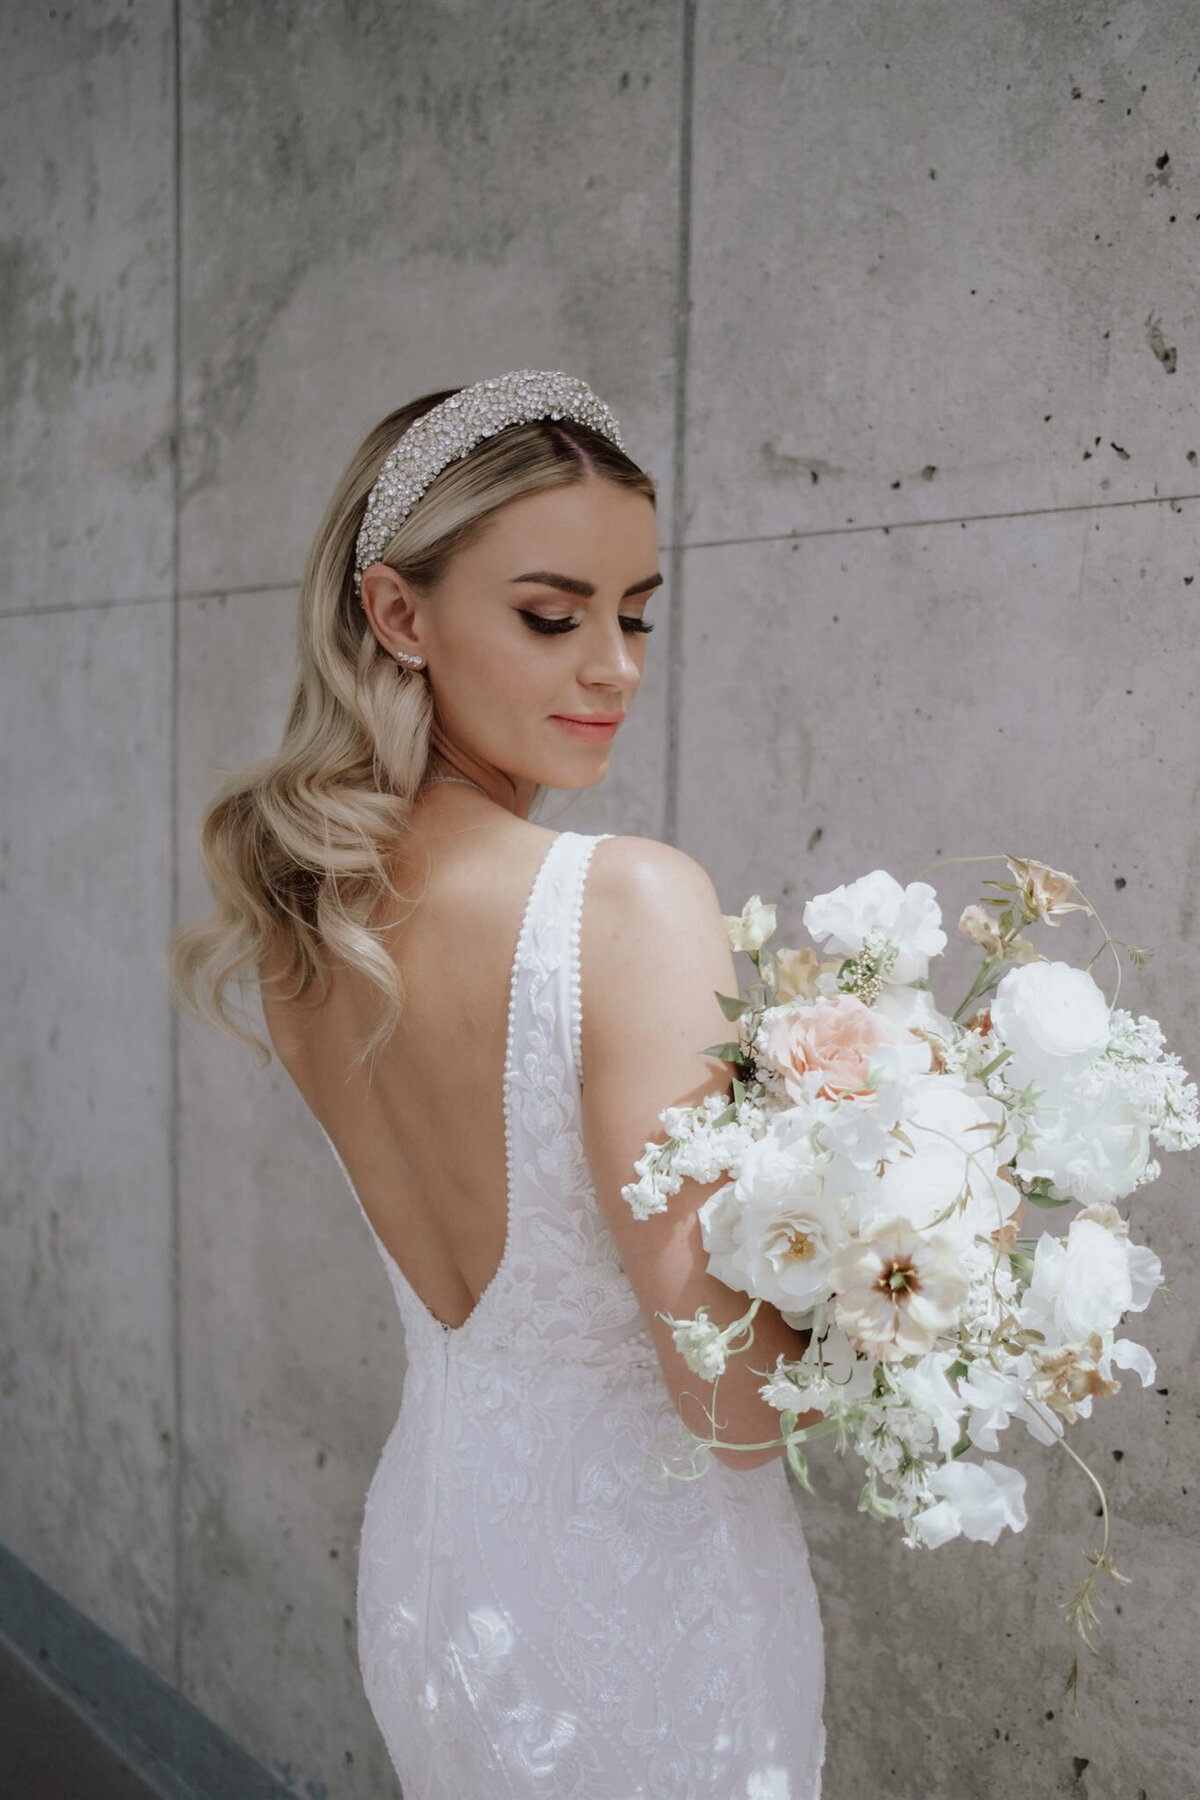 Stunning  bridal portrait featuring white florals, pearl encrusted bridal headband, styled by CNC Event Design, modern and elegant wedding planner based in Calgary, Alberta. Featured on the Brontë Bride Vendor Guide.